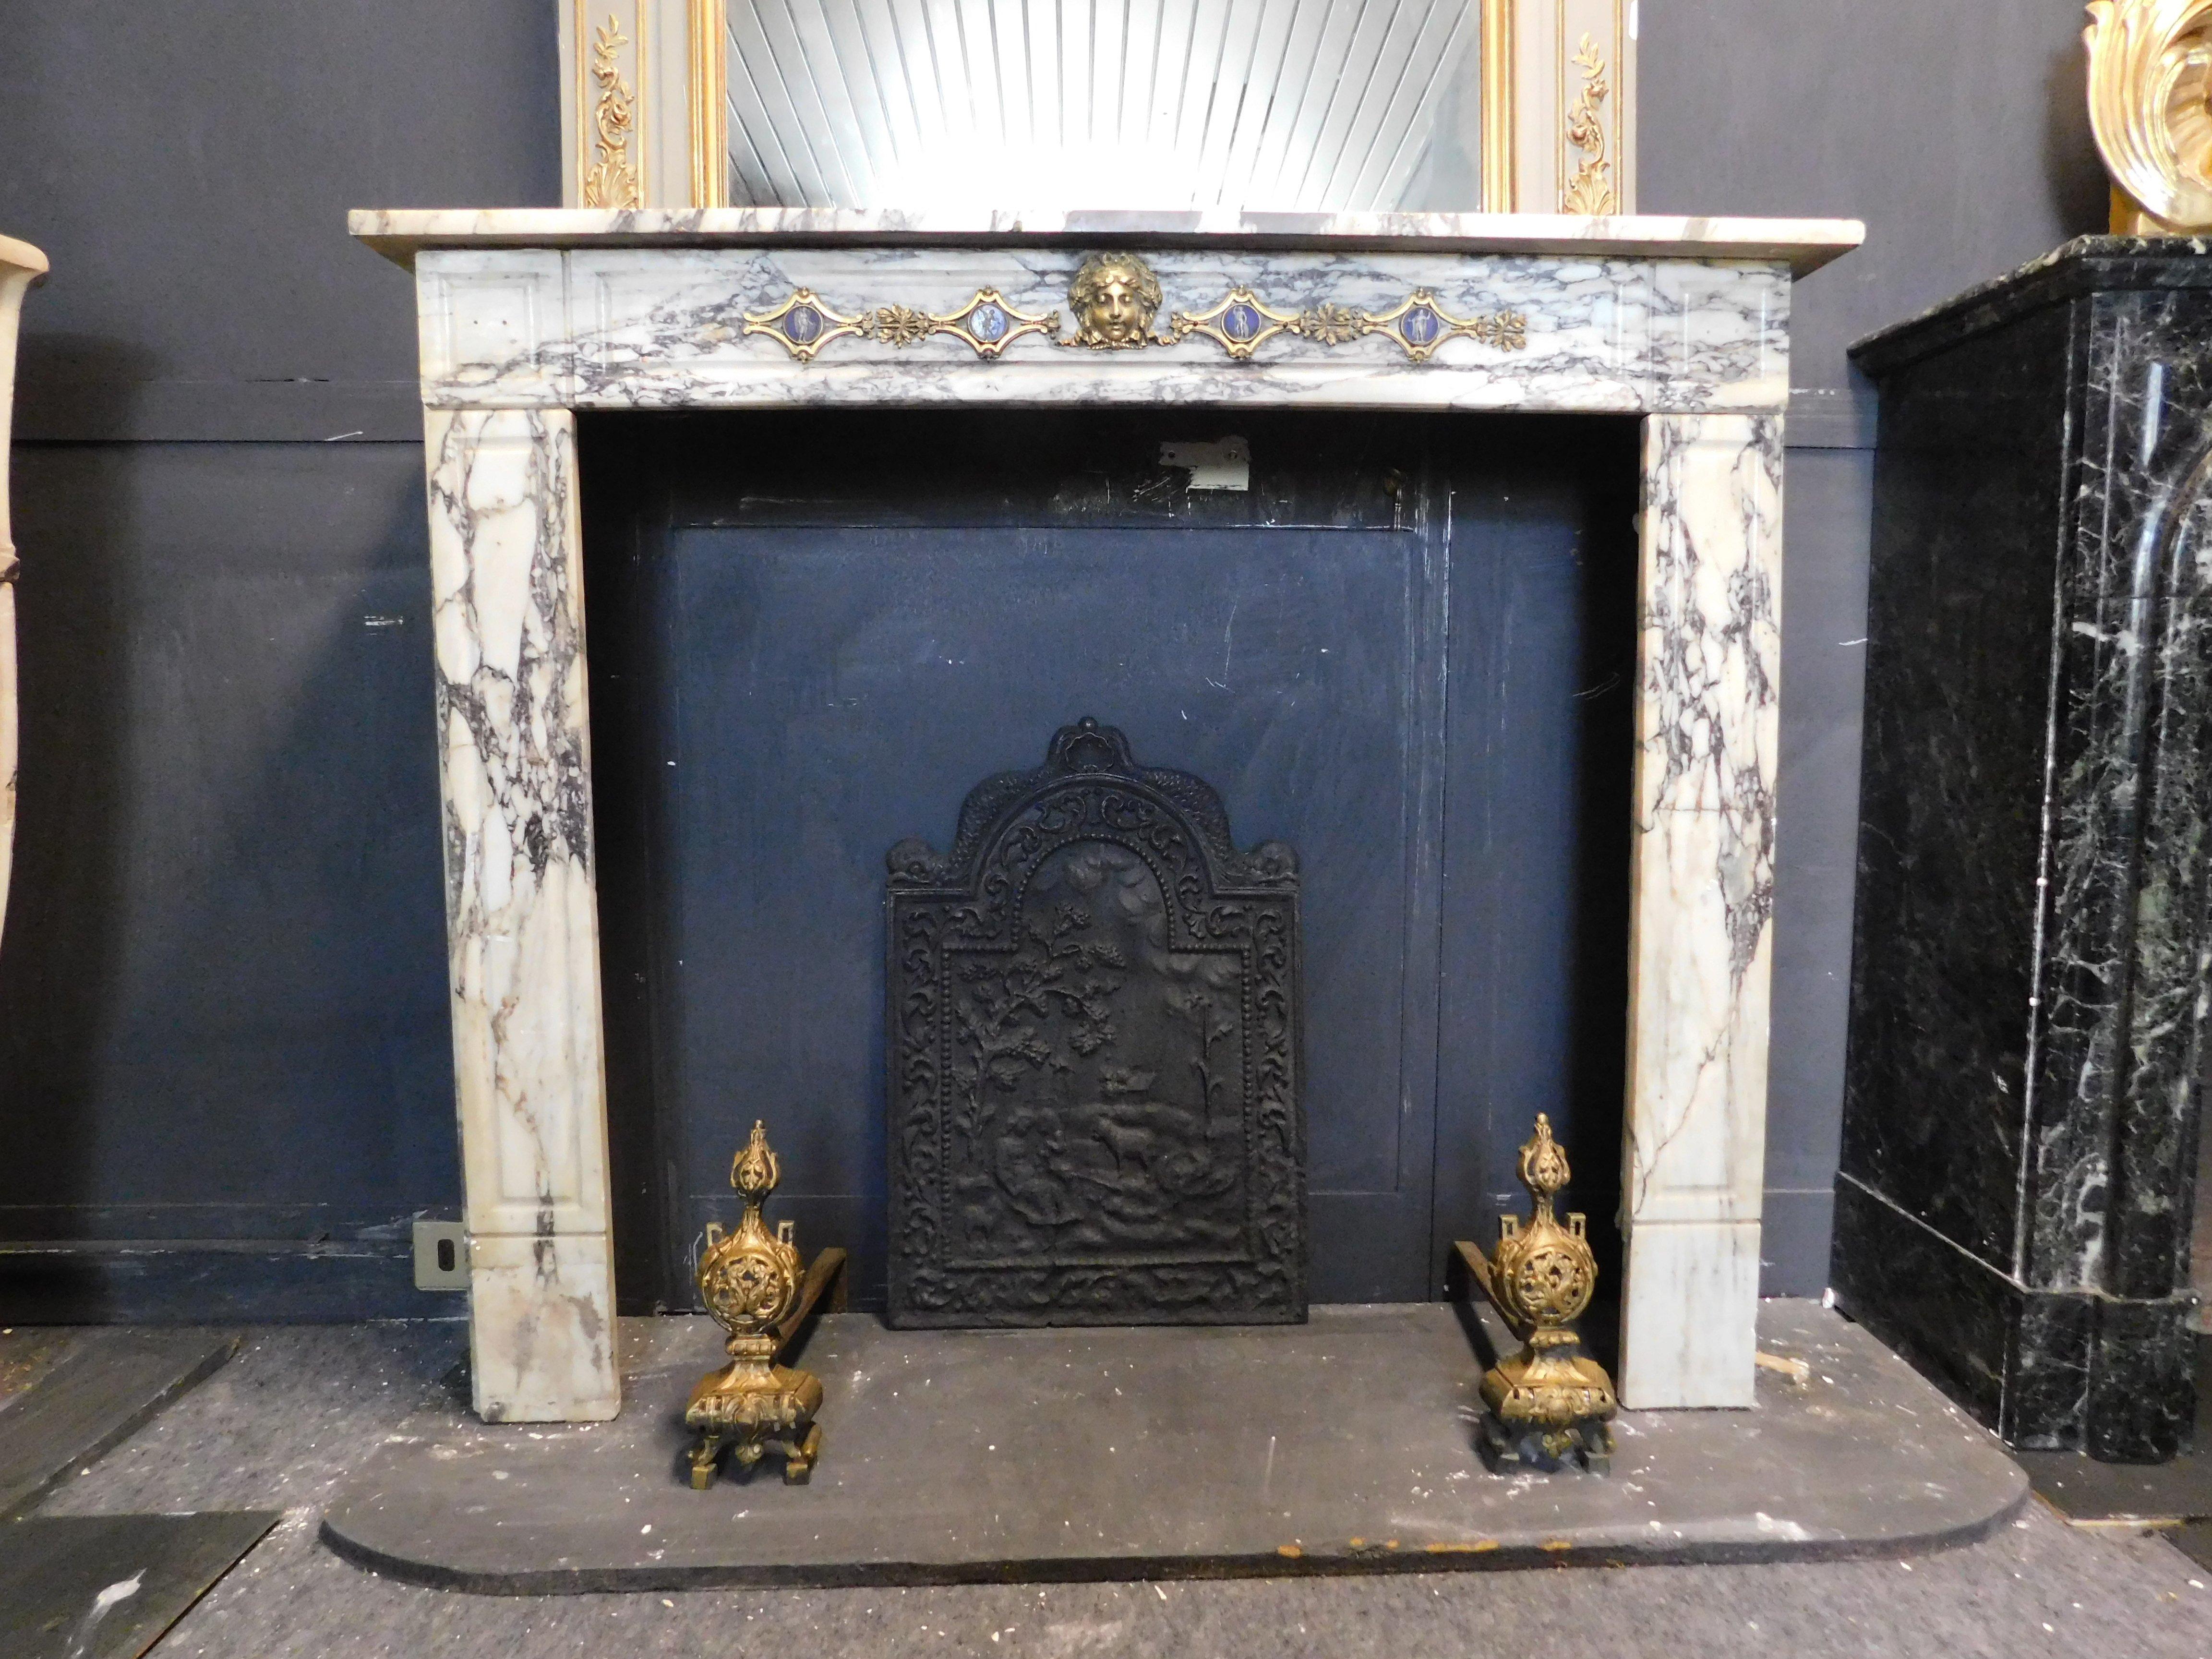 Antique fireplace in gray/purple veined white marble, embellished with friezes and brass sculptures applied over the marble, built in the early 1900s for a palace in Italy, ideal for apartments or small elegant houses, given the small size, refined